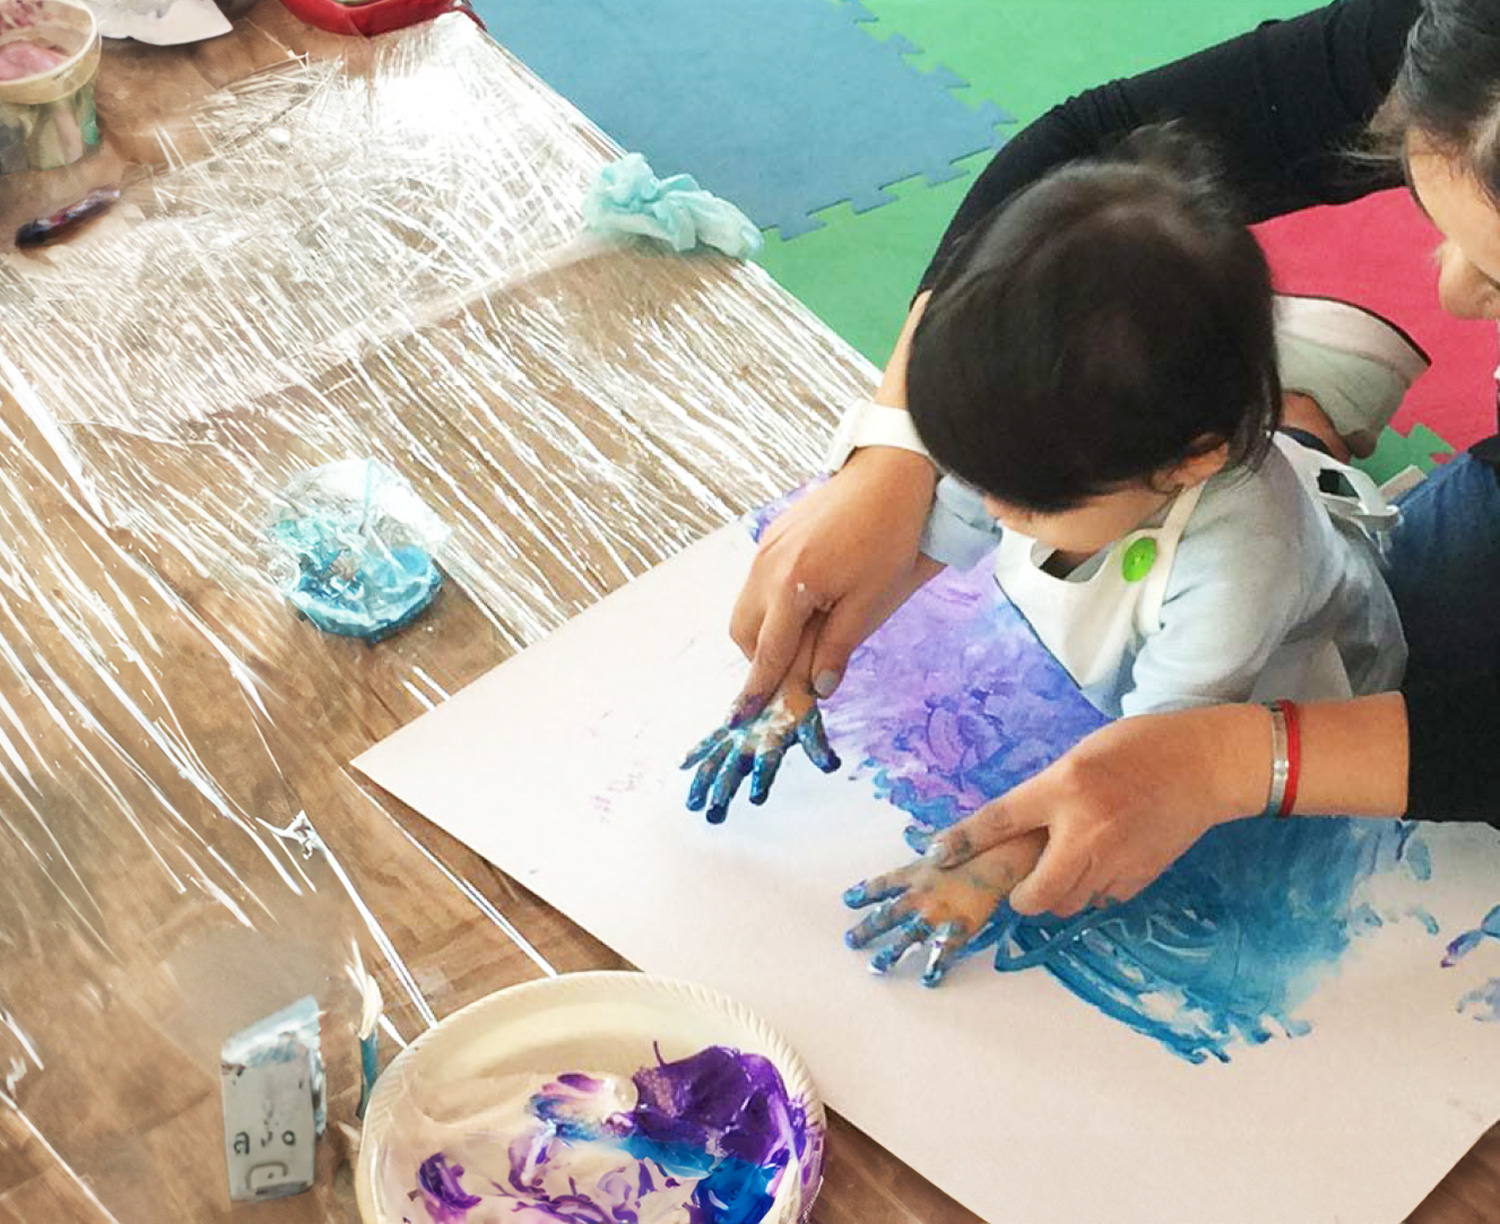 A child paints with his hands in blue paint on a poster board.